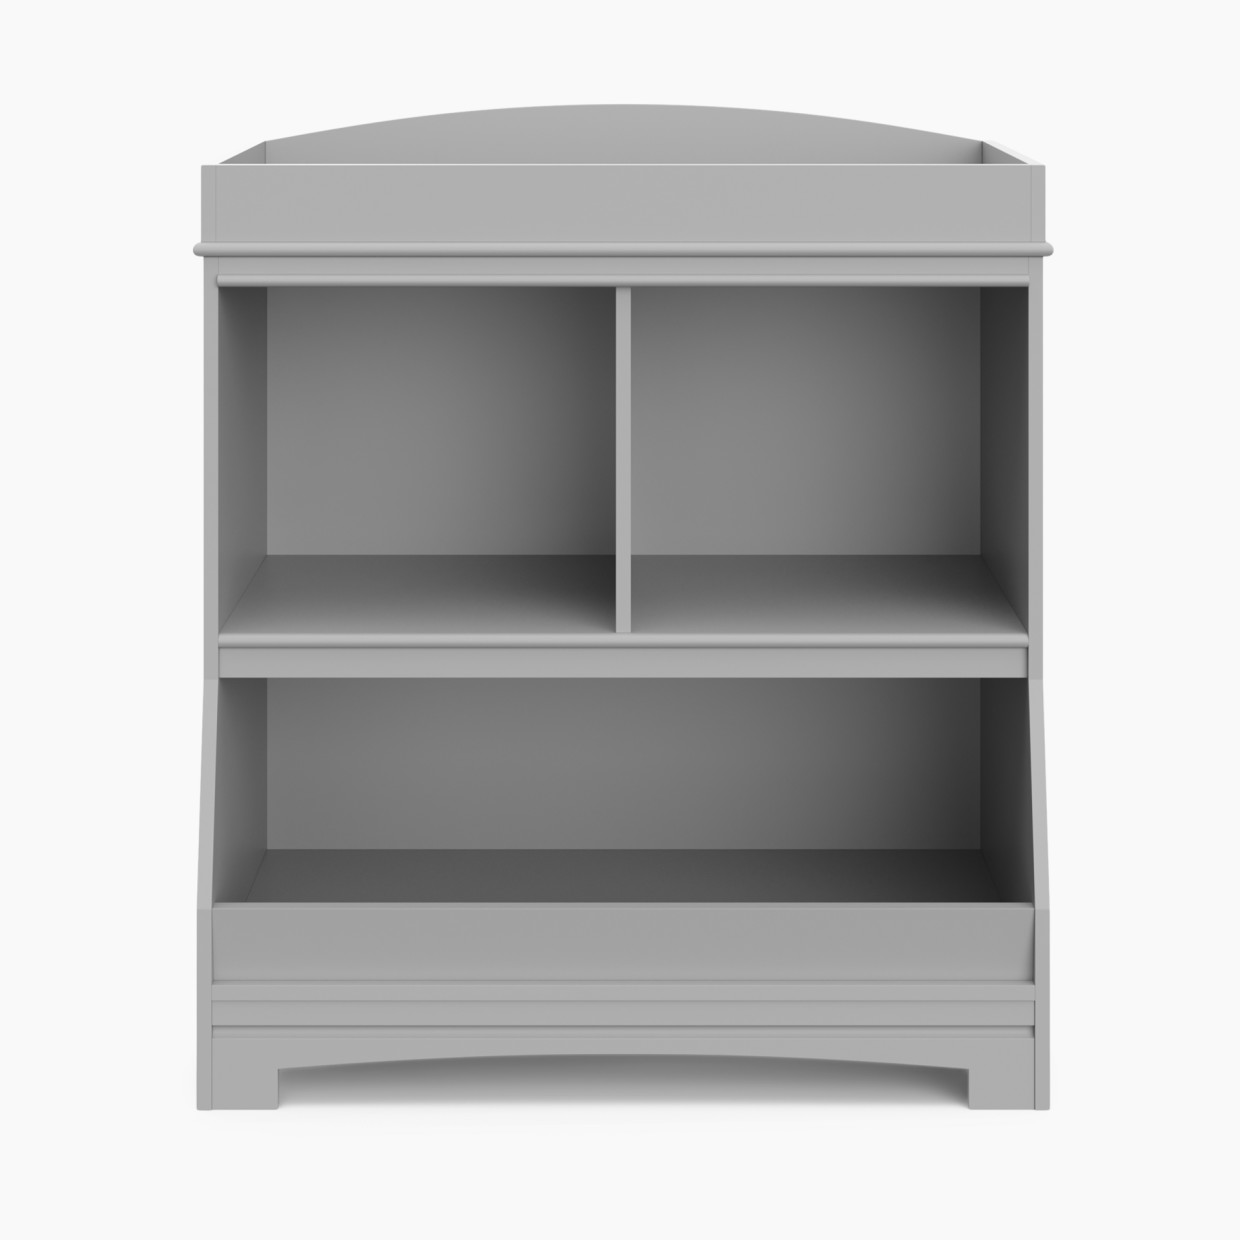 Graco Benton Changing Table with Removable Topper - Pebble Gray.